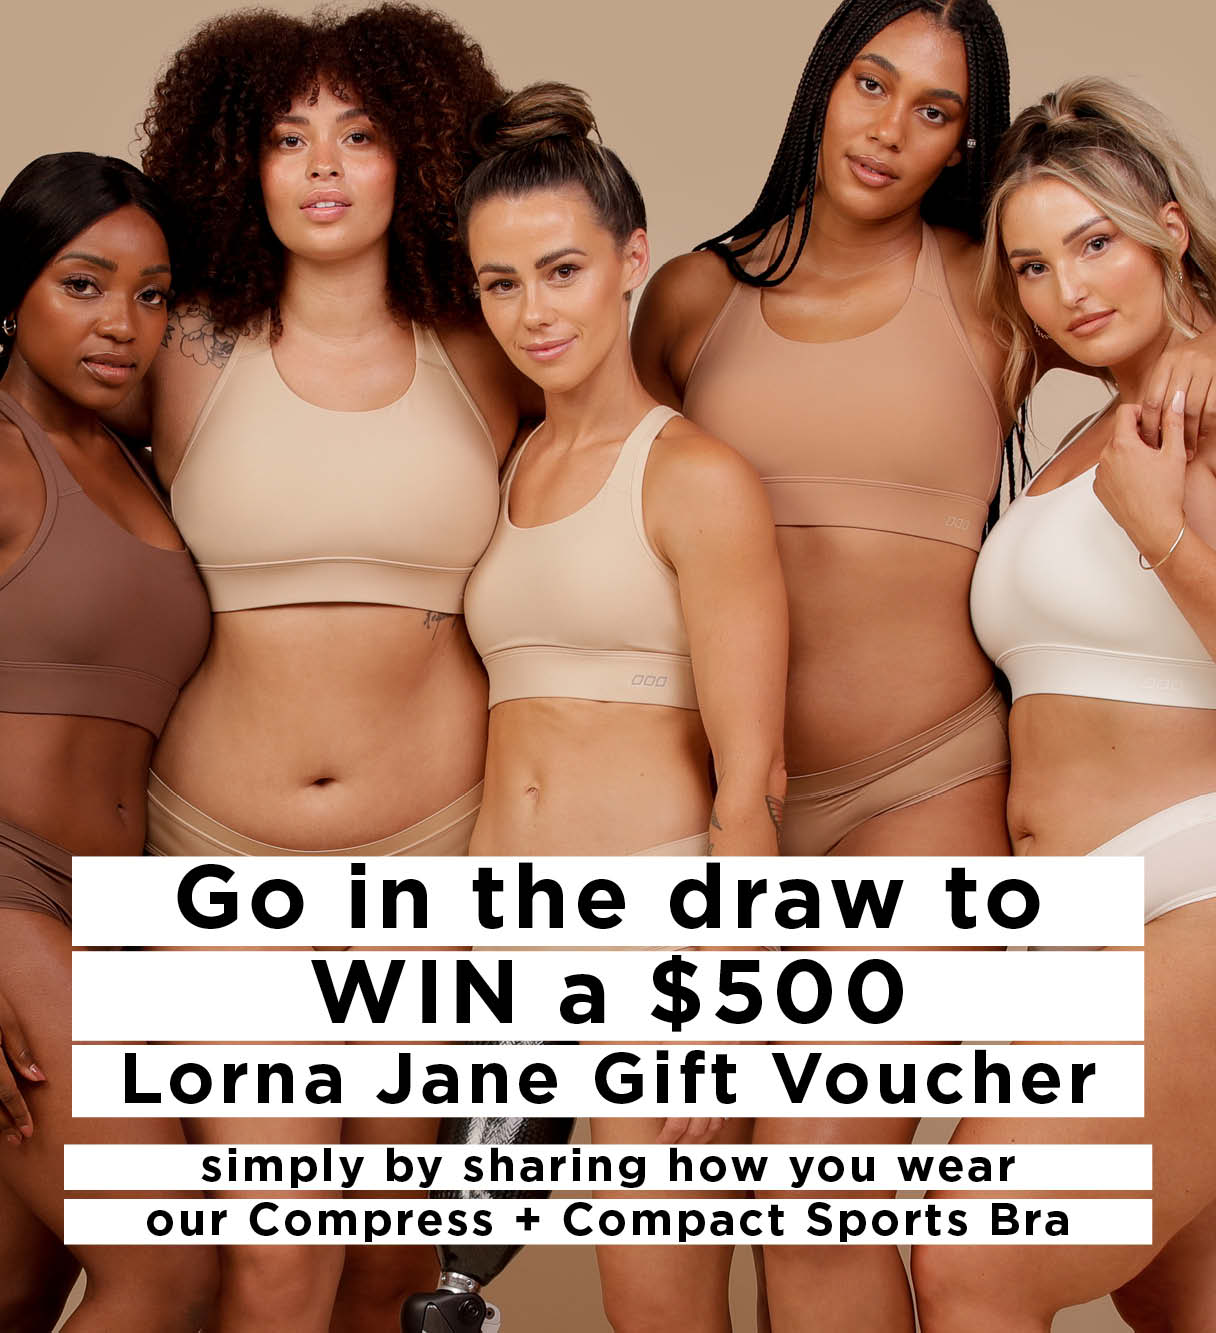 Go in the draw to WIN a $500 Lorna Jane Gift Voucher. Simply by sharing how you wear our Compress + Compact Sports Bra